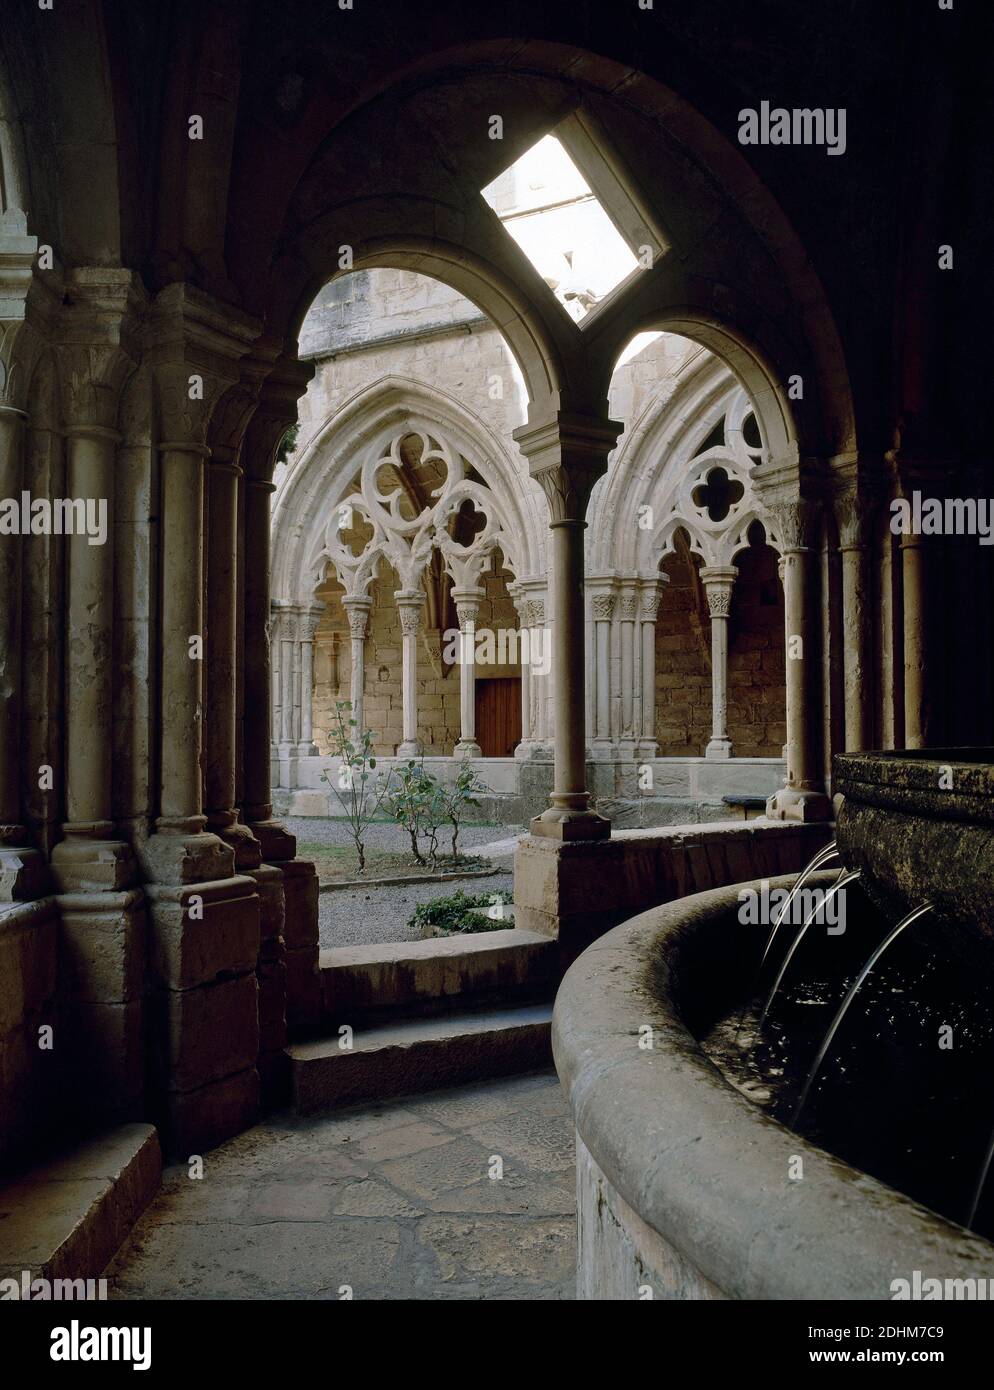 Spain, Catalonia, Tarragona province, Vimbodí. Royal Monastery of Santa Maria de Poblet. The construction of the monastery began in the 12th century.The lavabo and fountain, used by the monks for cleaning and washings. Stock Photo